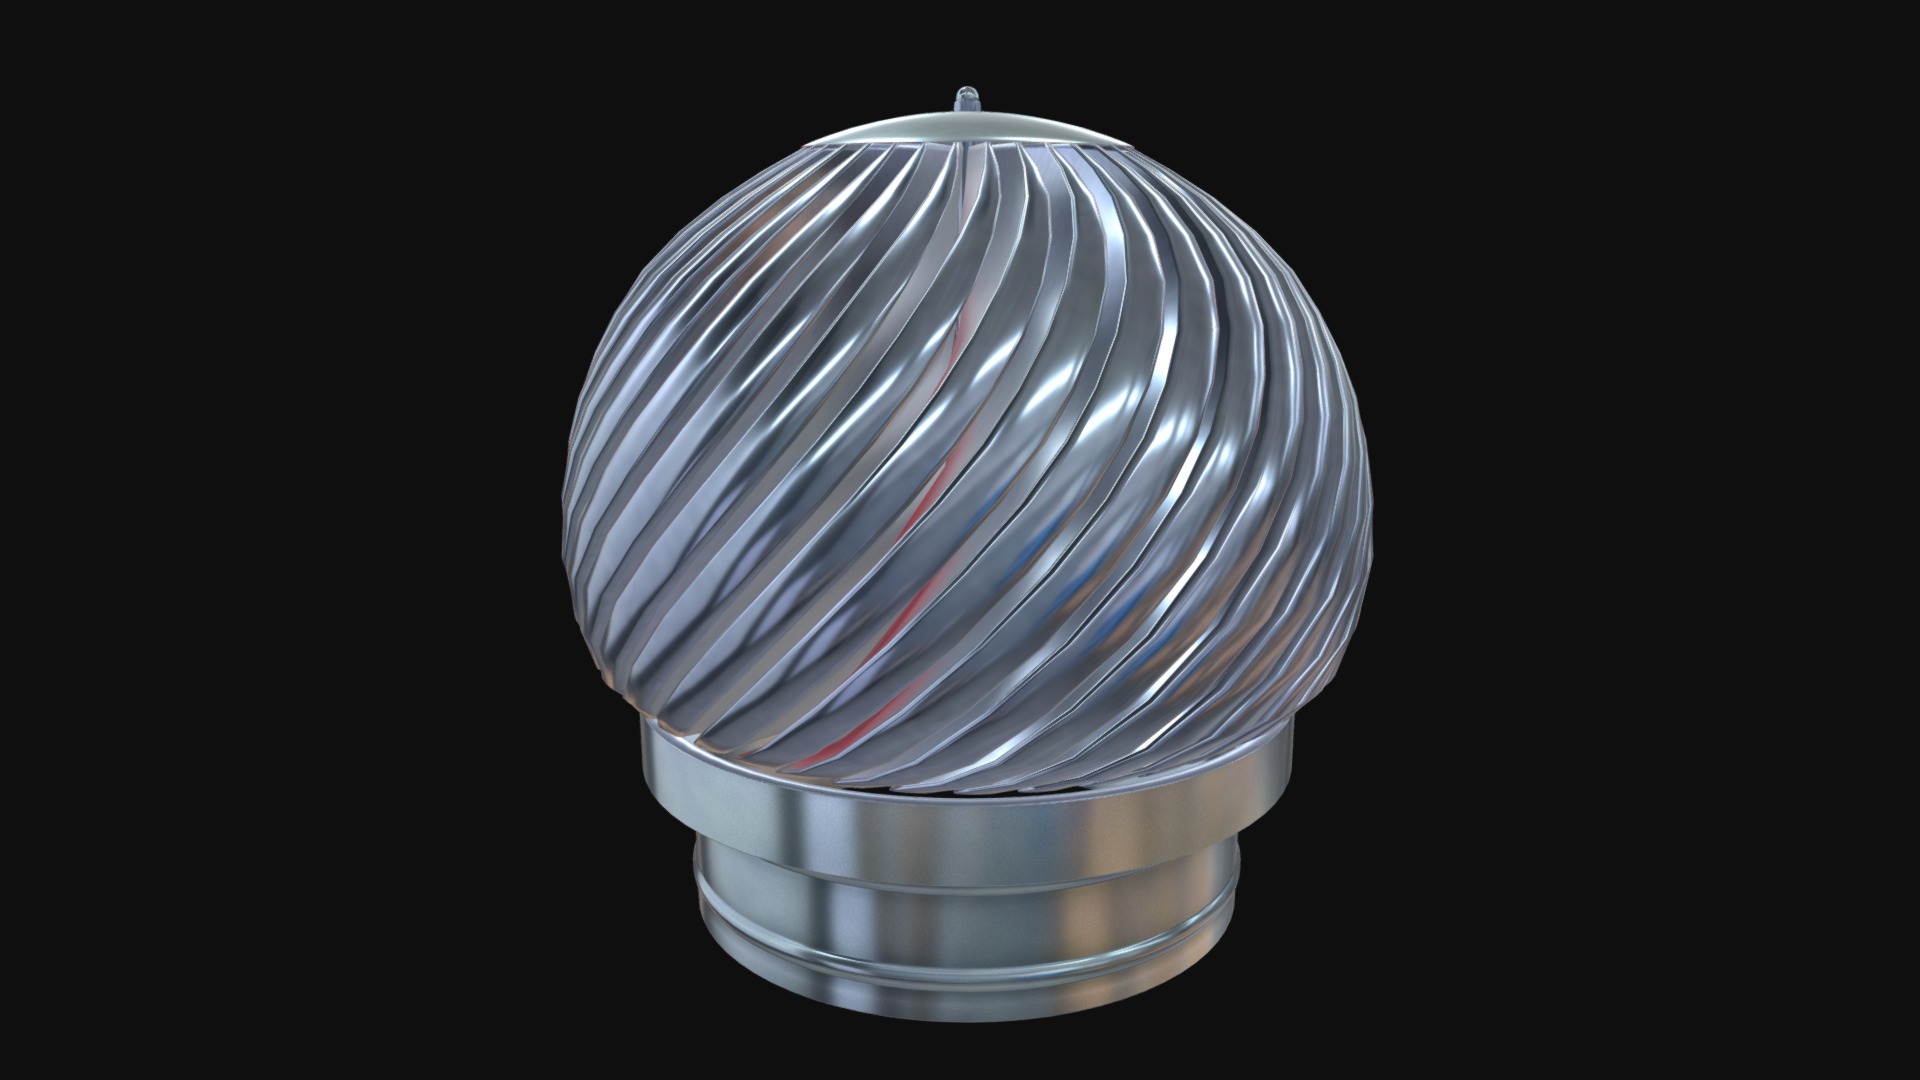 3D model Rotating chimney cap - This is a 3D model of the Rotating chimney cap. The 3D model is about a glass ball with a red and white design.